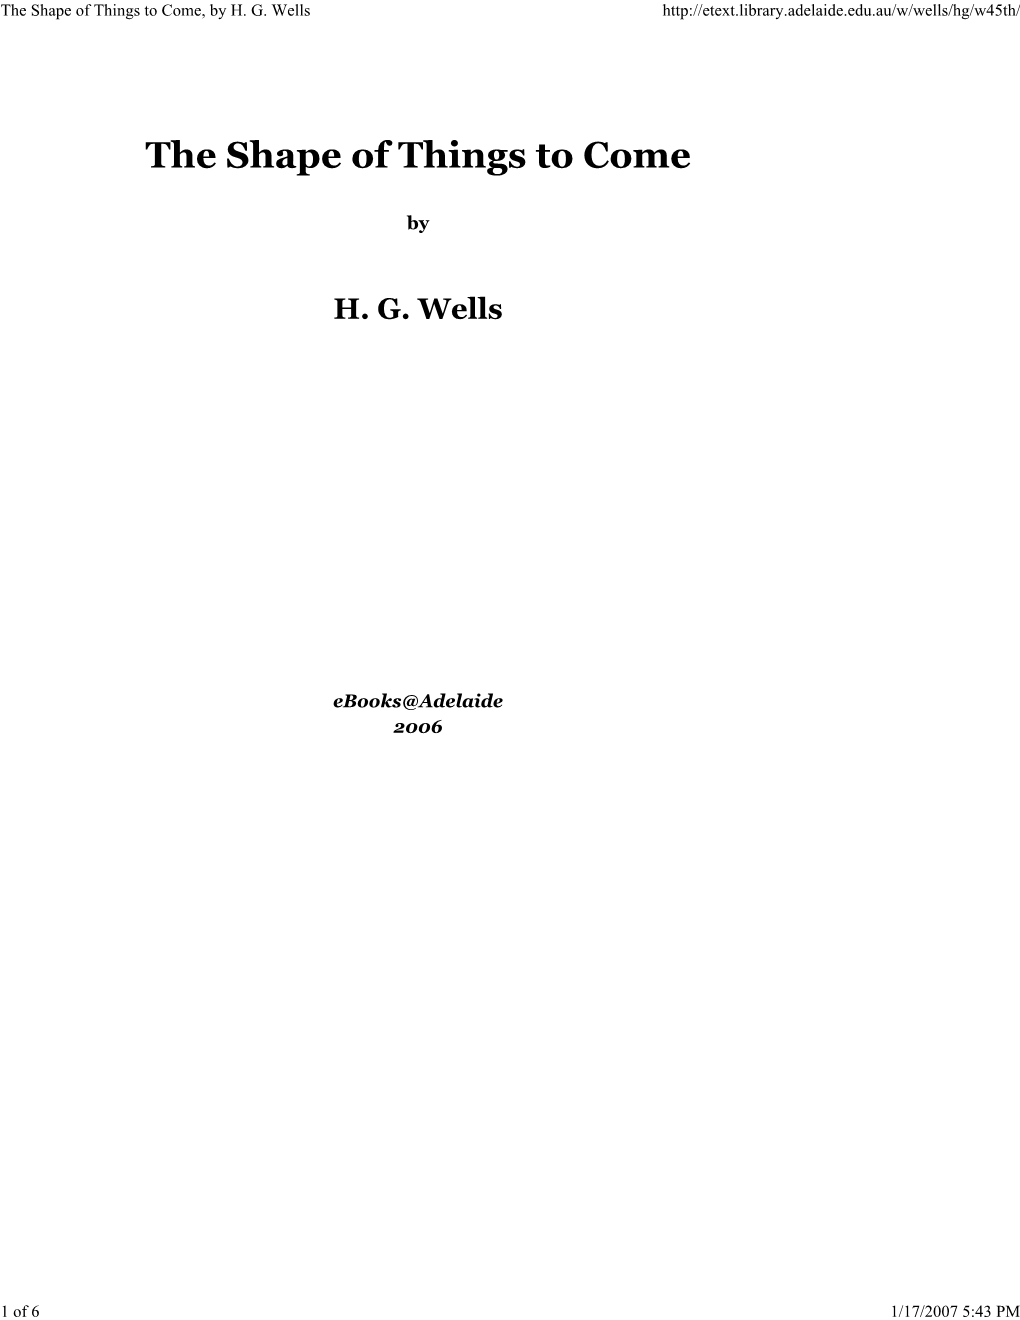 The Shape of Things to Come, by H. G. Wells